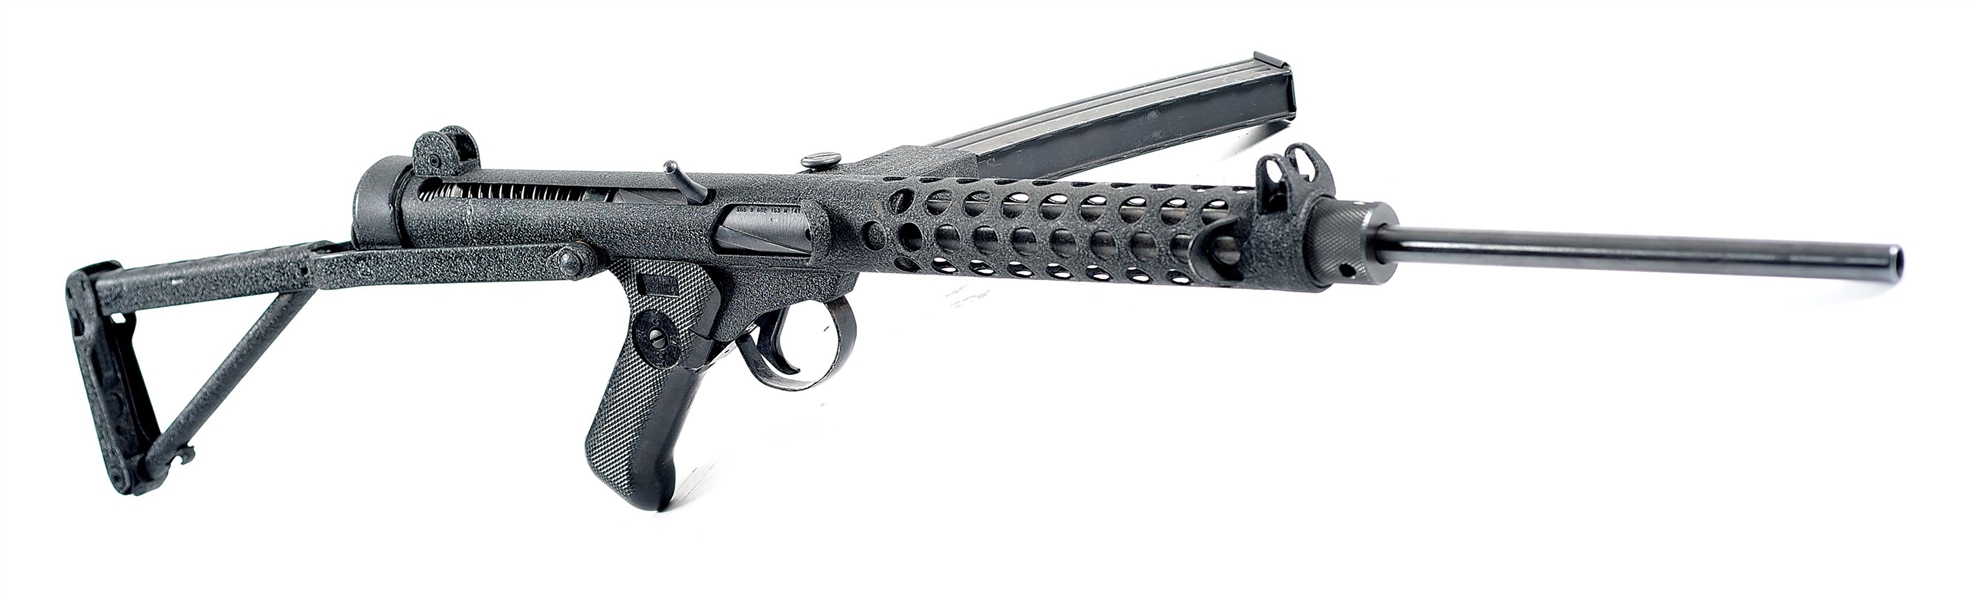 (M) WISE LITE ARMS STERLING SPORTER SEMI-AUTOMATIC RIFLE.